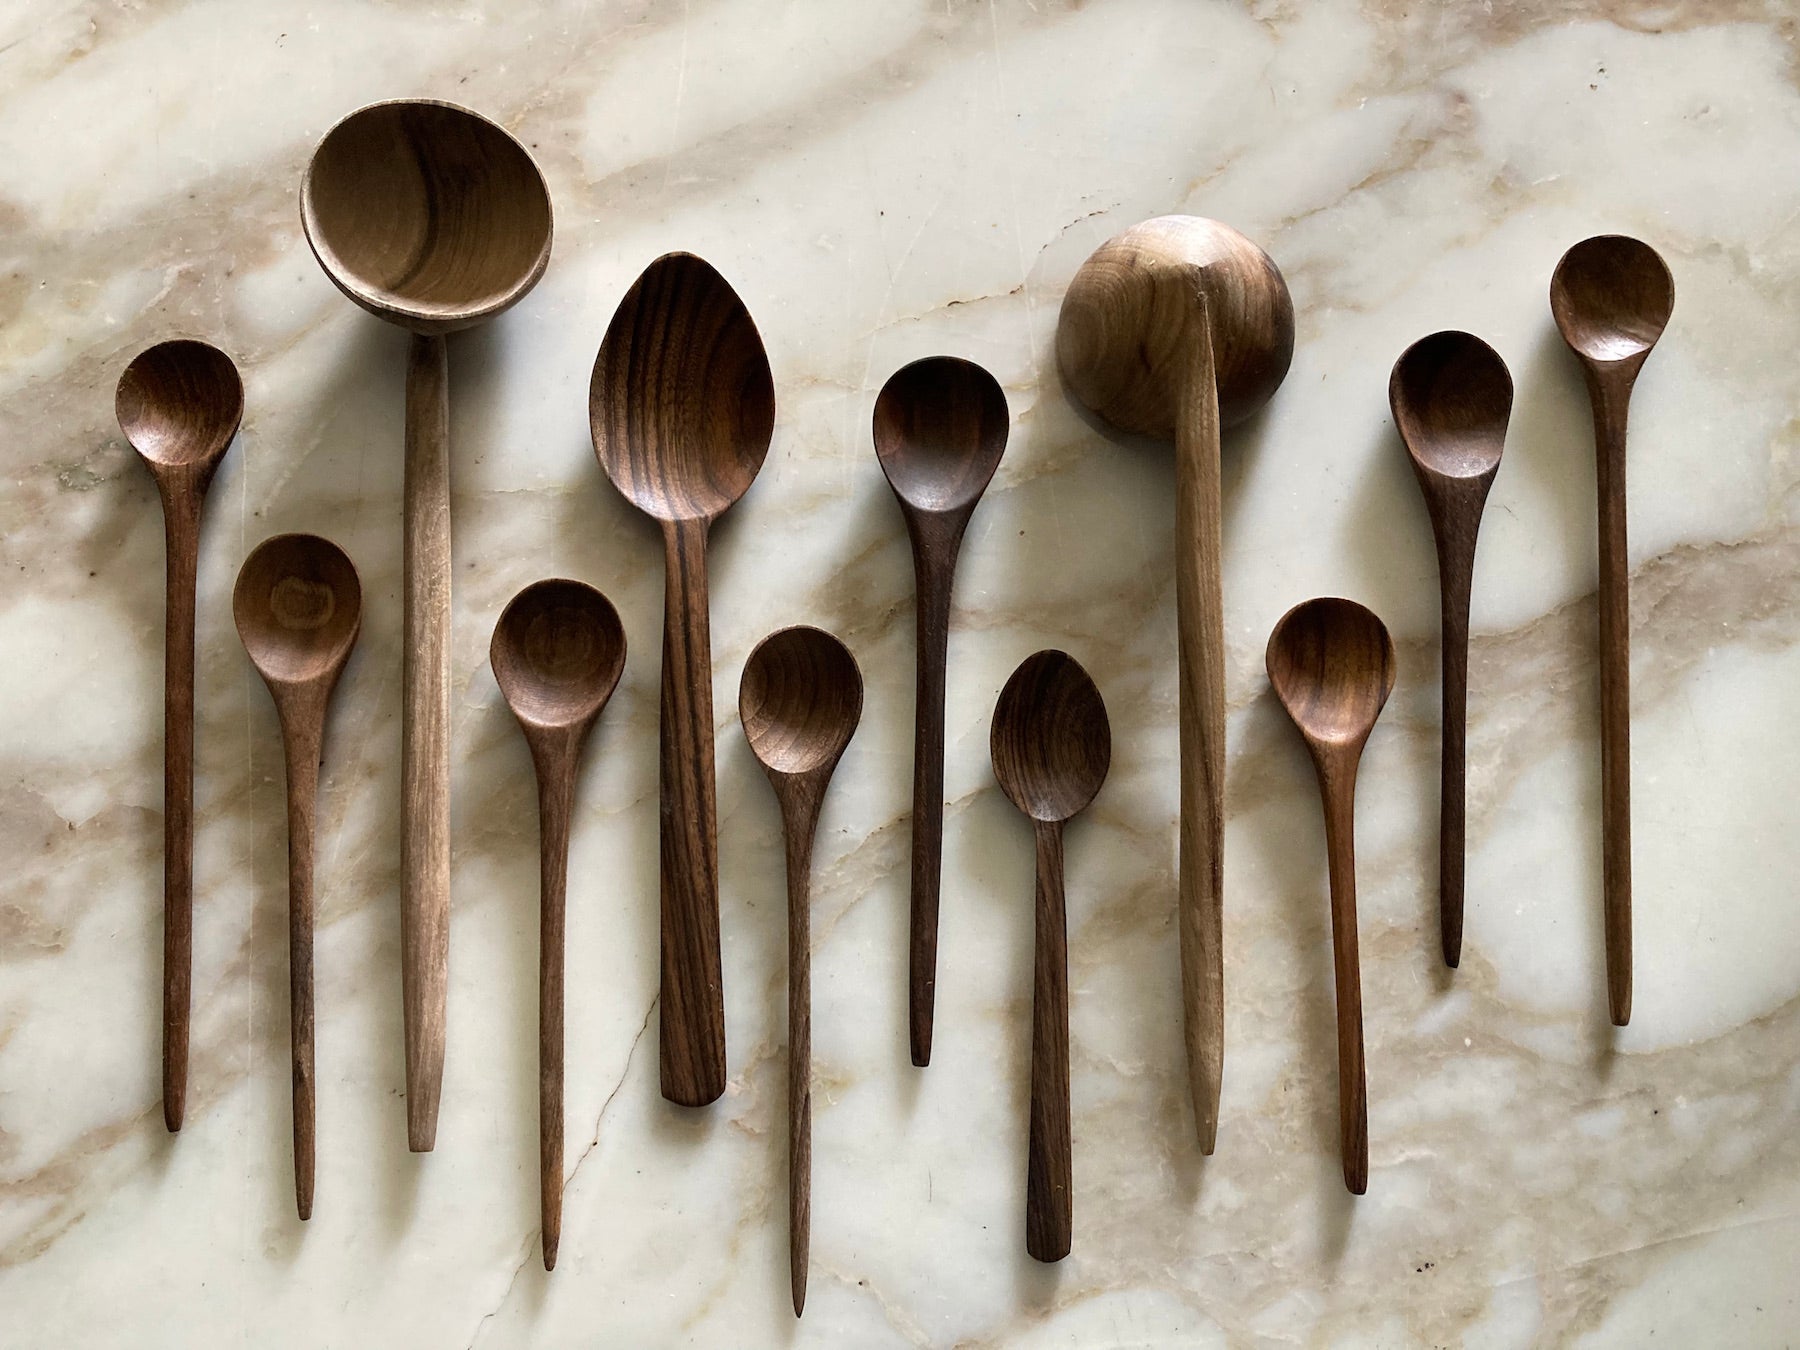 Walnut Spoon Collection